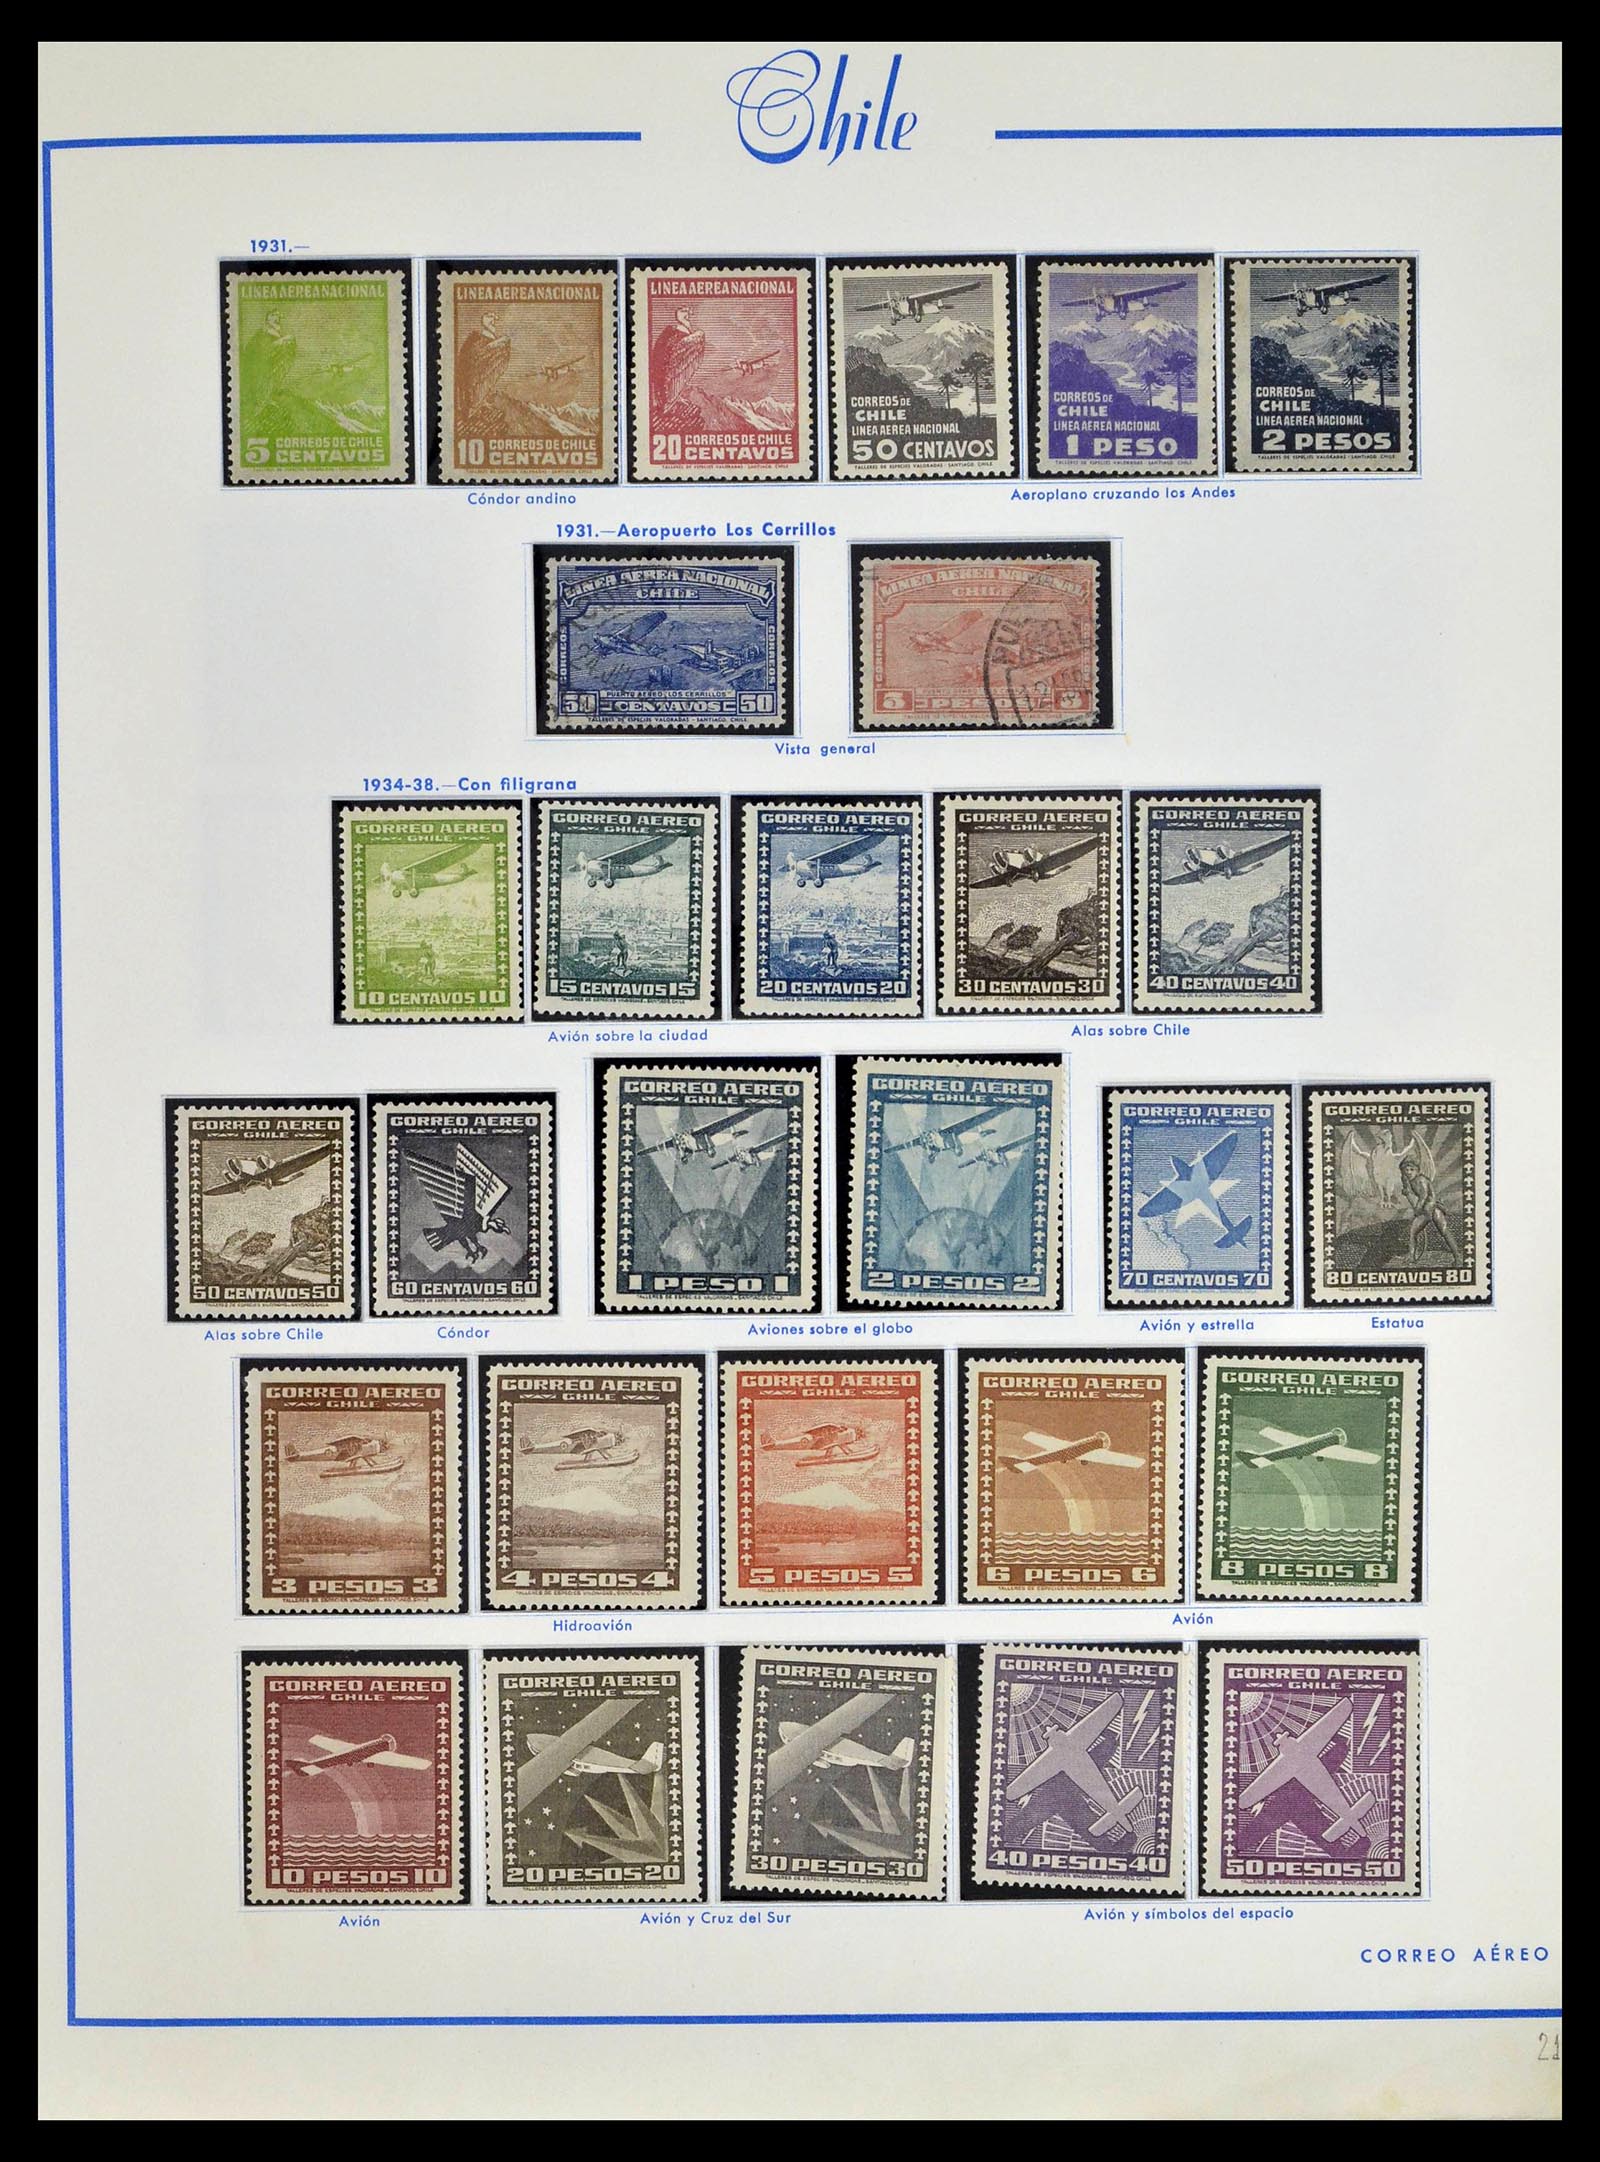 39213 0044 - Stamp collection 39213 Chile 1853-1970.